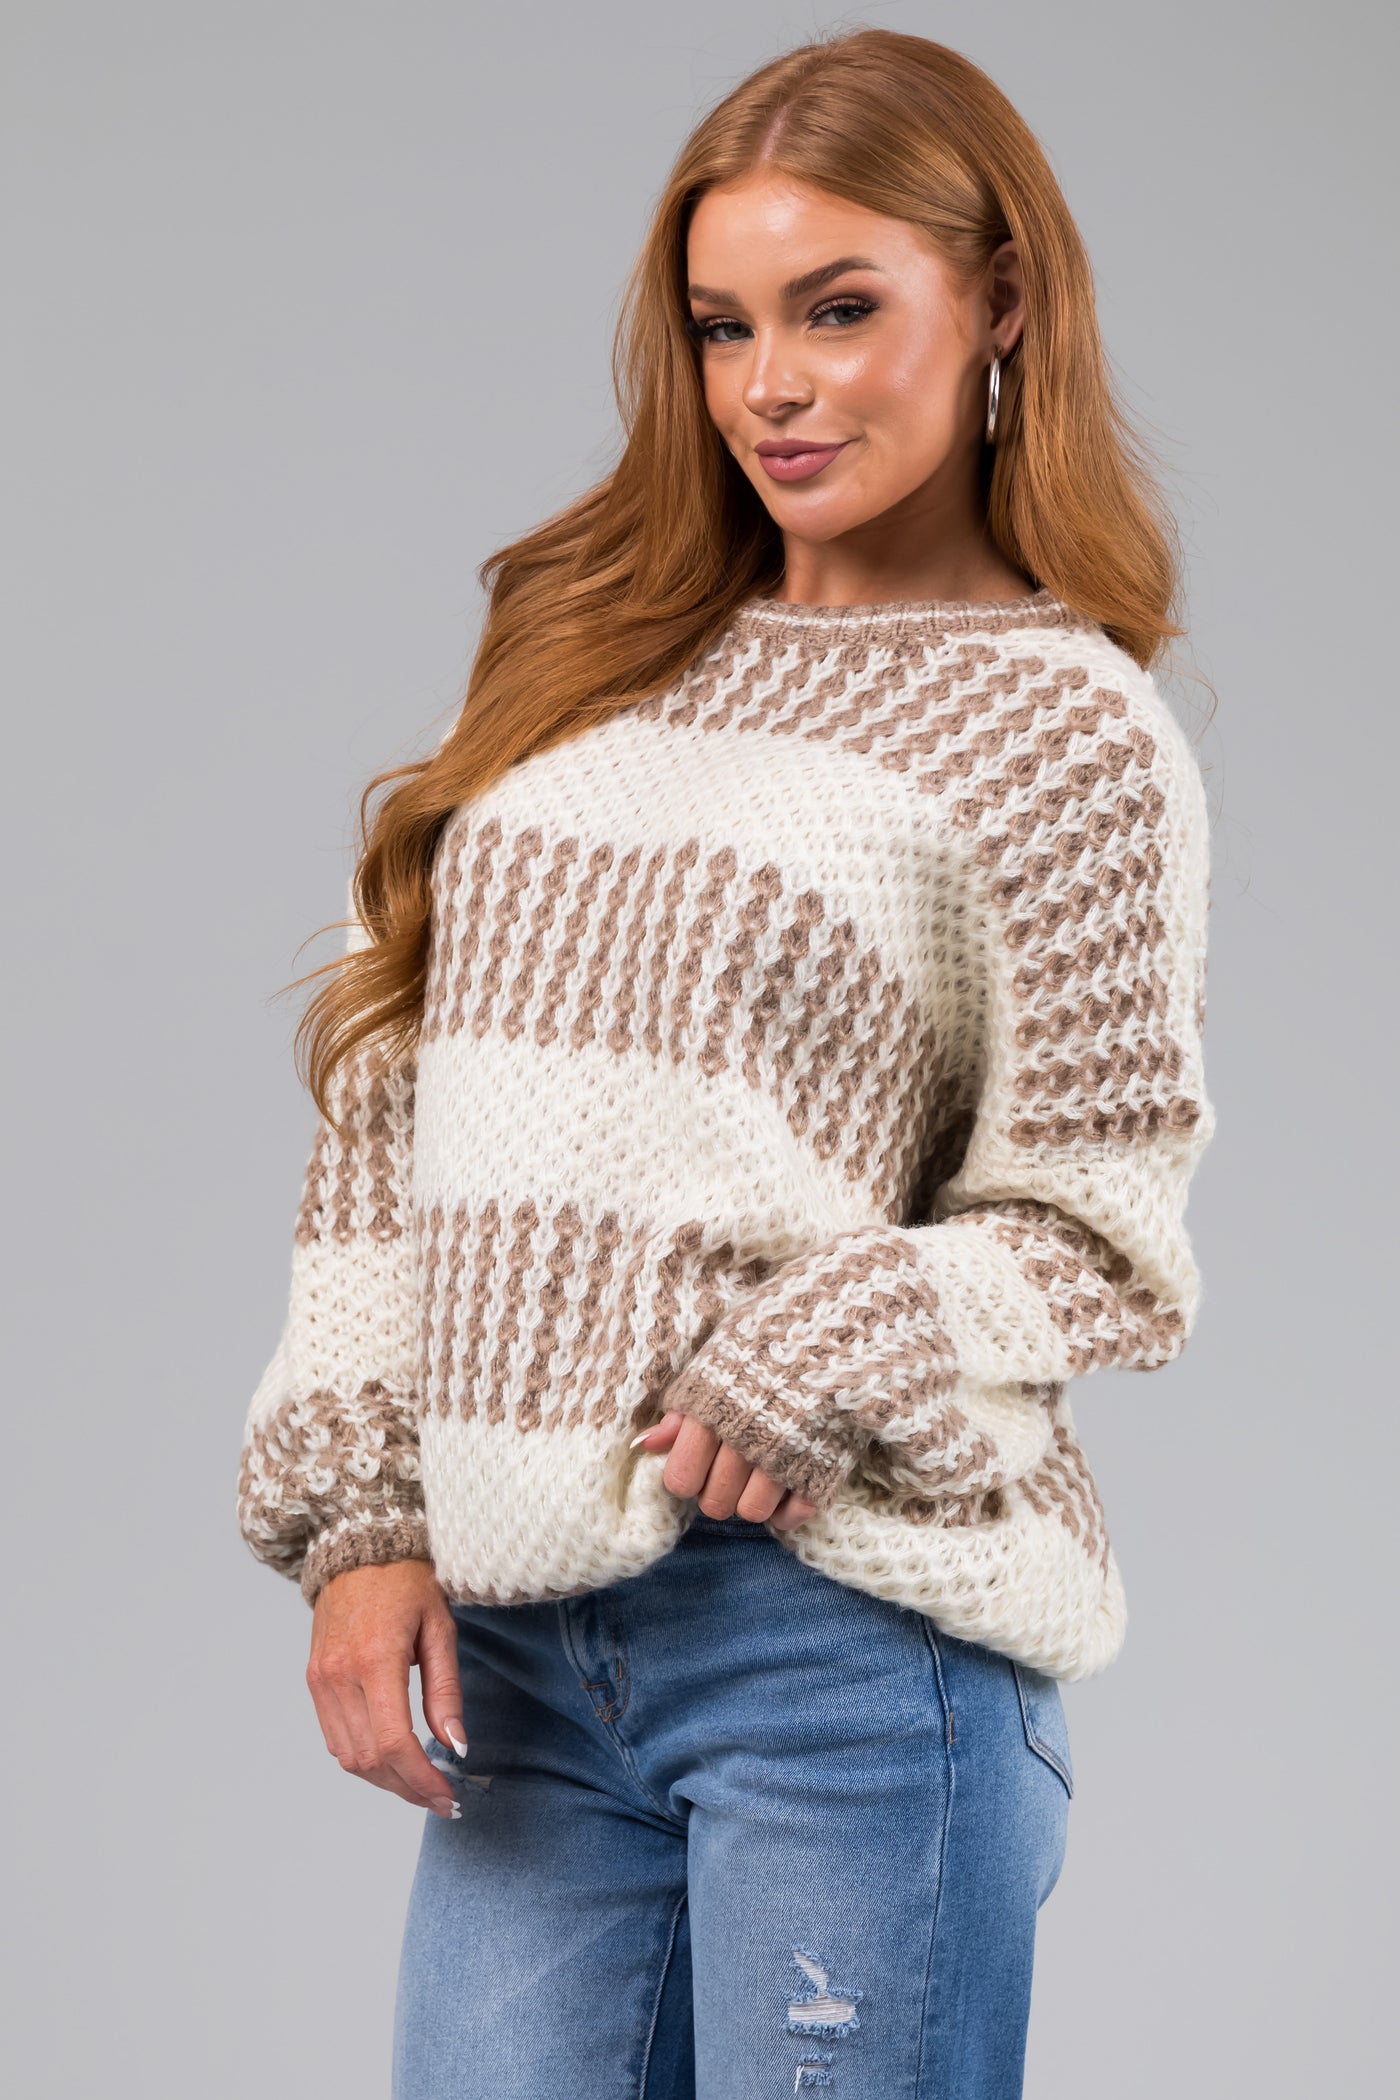 Cream and Coffee Striped Loose Knit Sweater